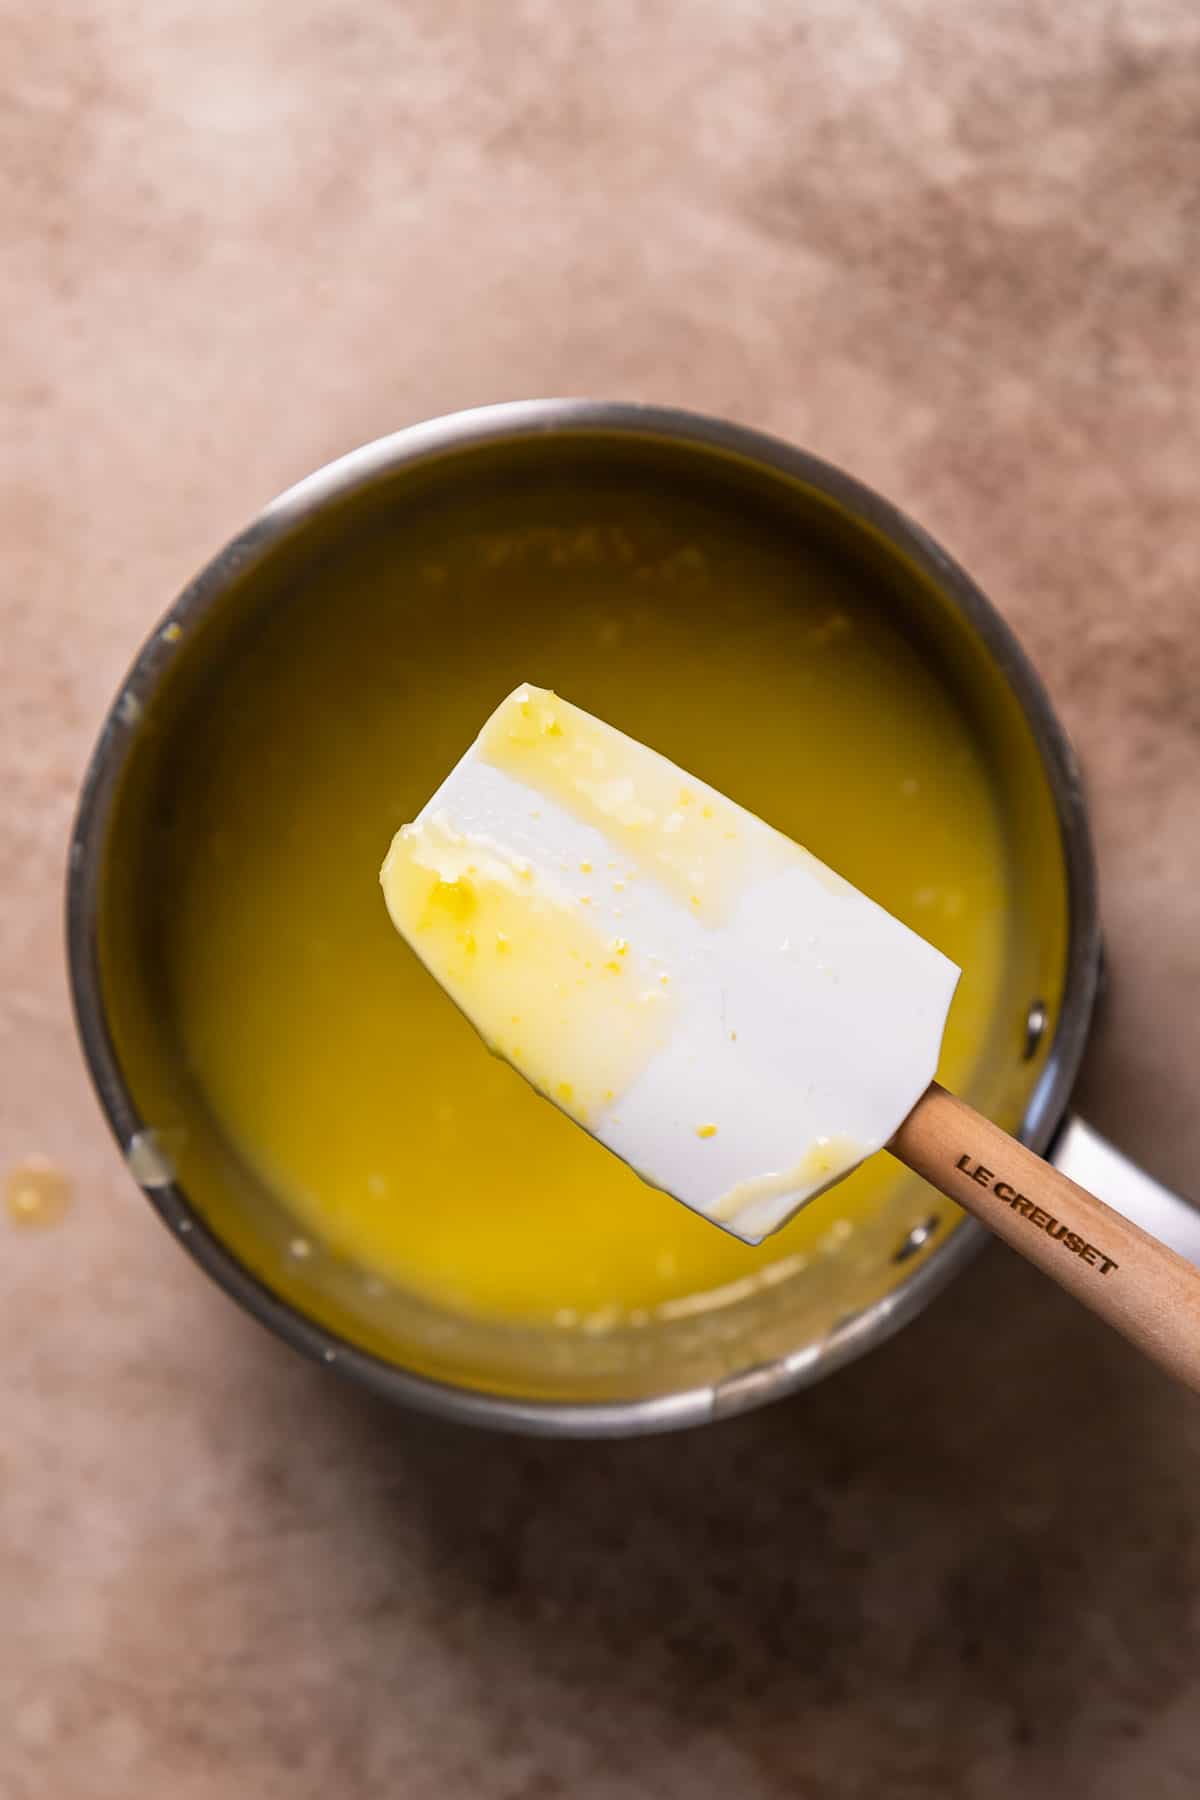 A spatula coated in lemon curd to show the thickened texture.